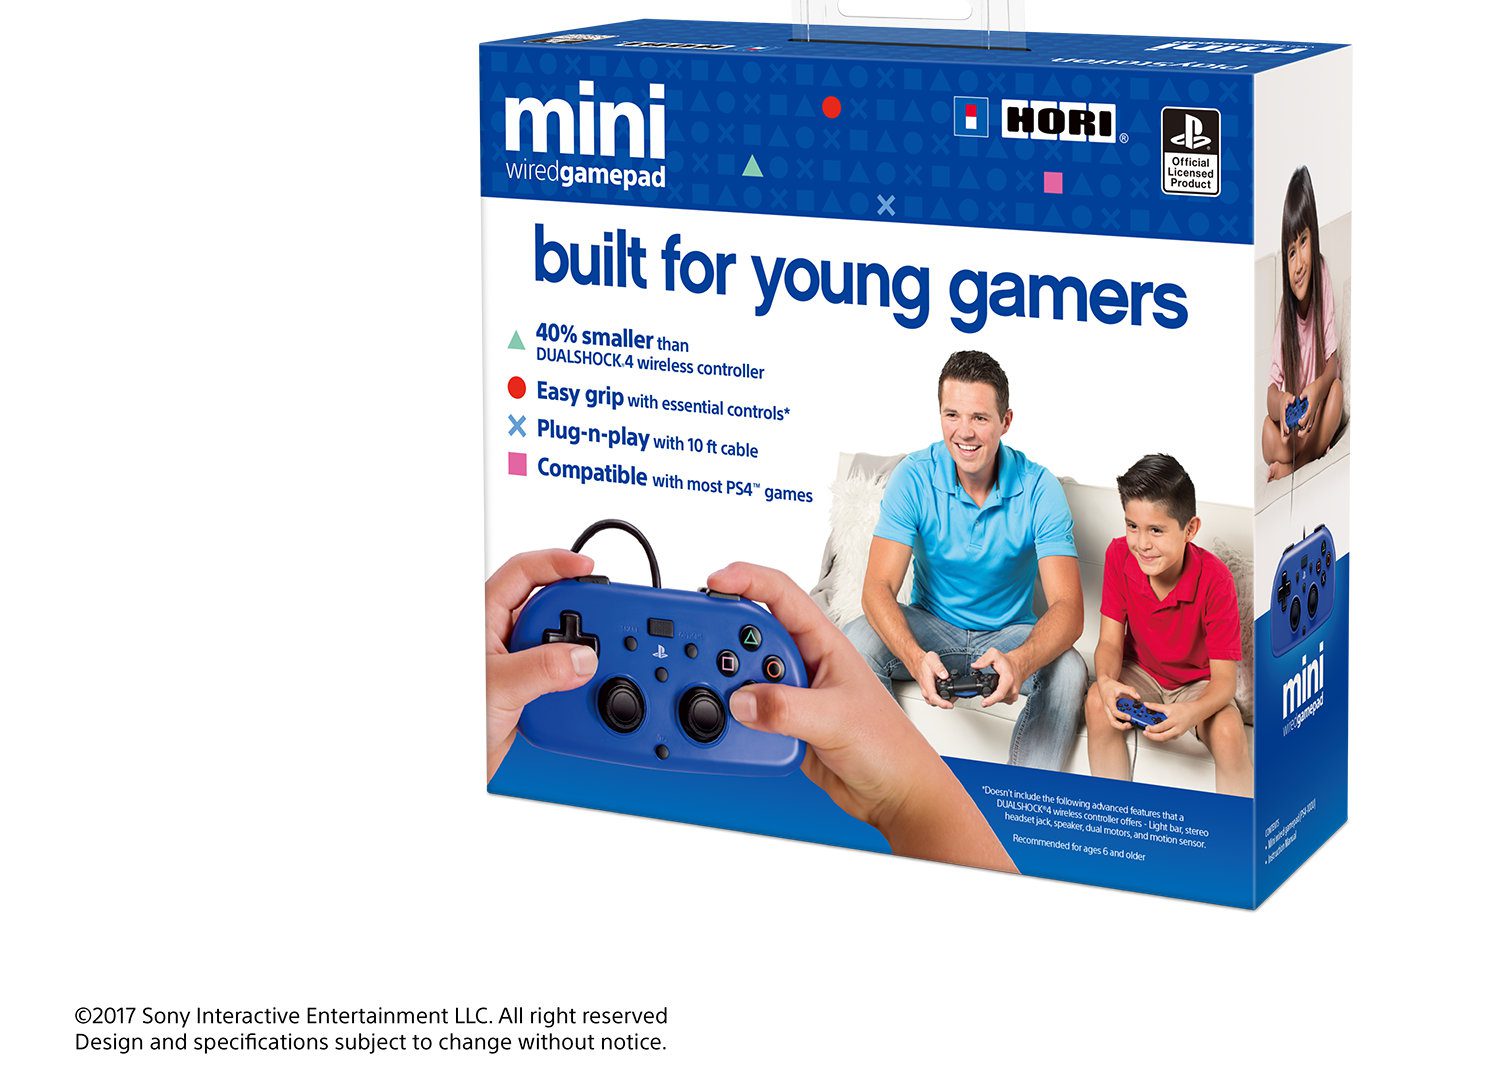 wired mini gamepad for playstation 4